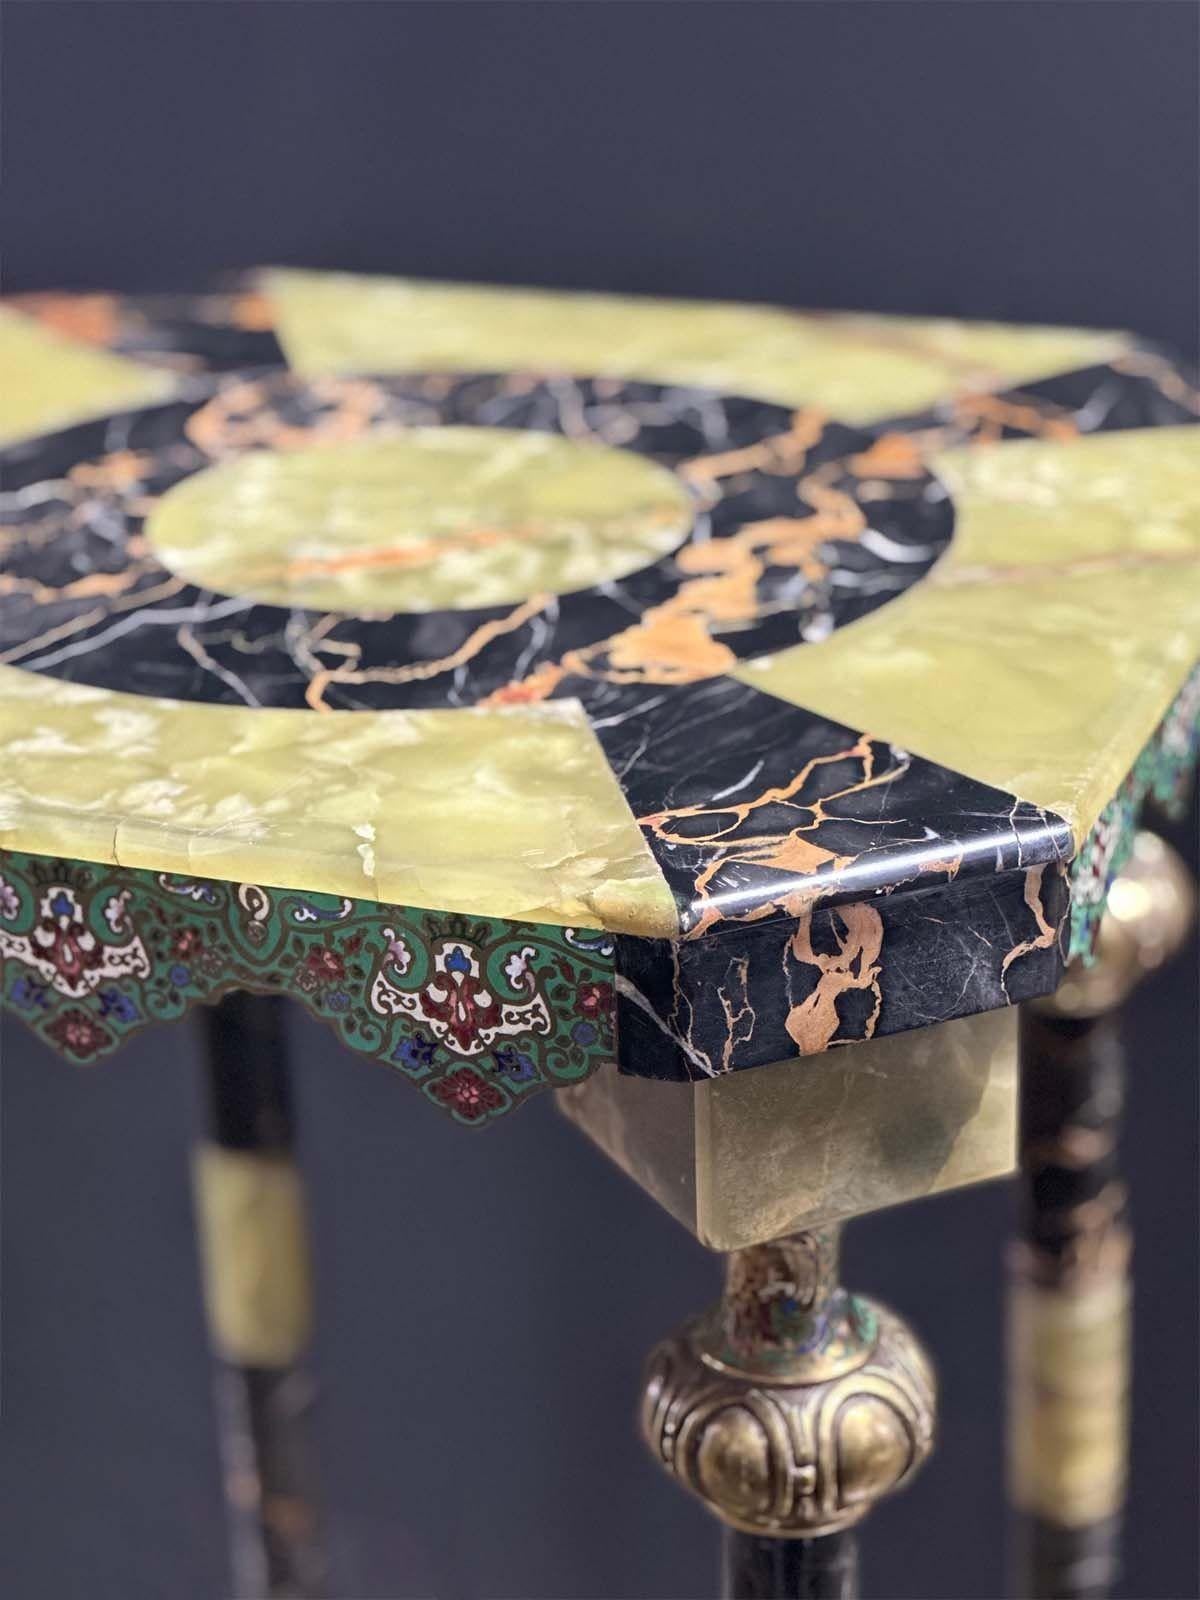 Late 19th Century onyx and marble Cloisonné side table. Made in France. 
Dimensions:
29.5